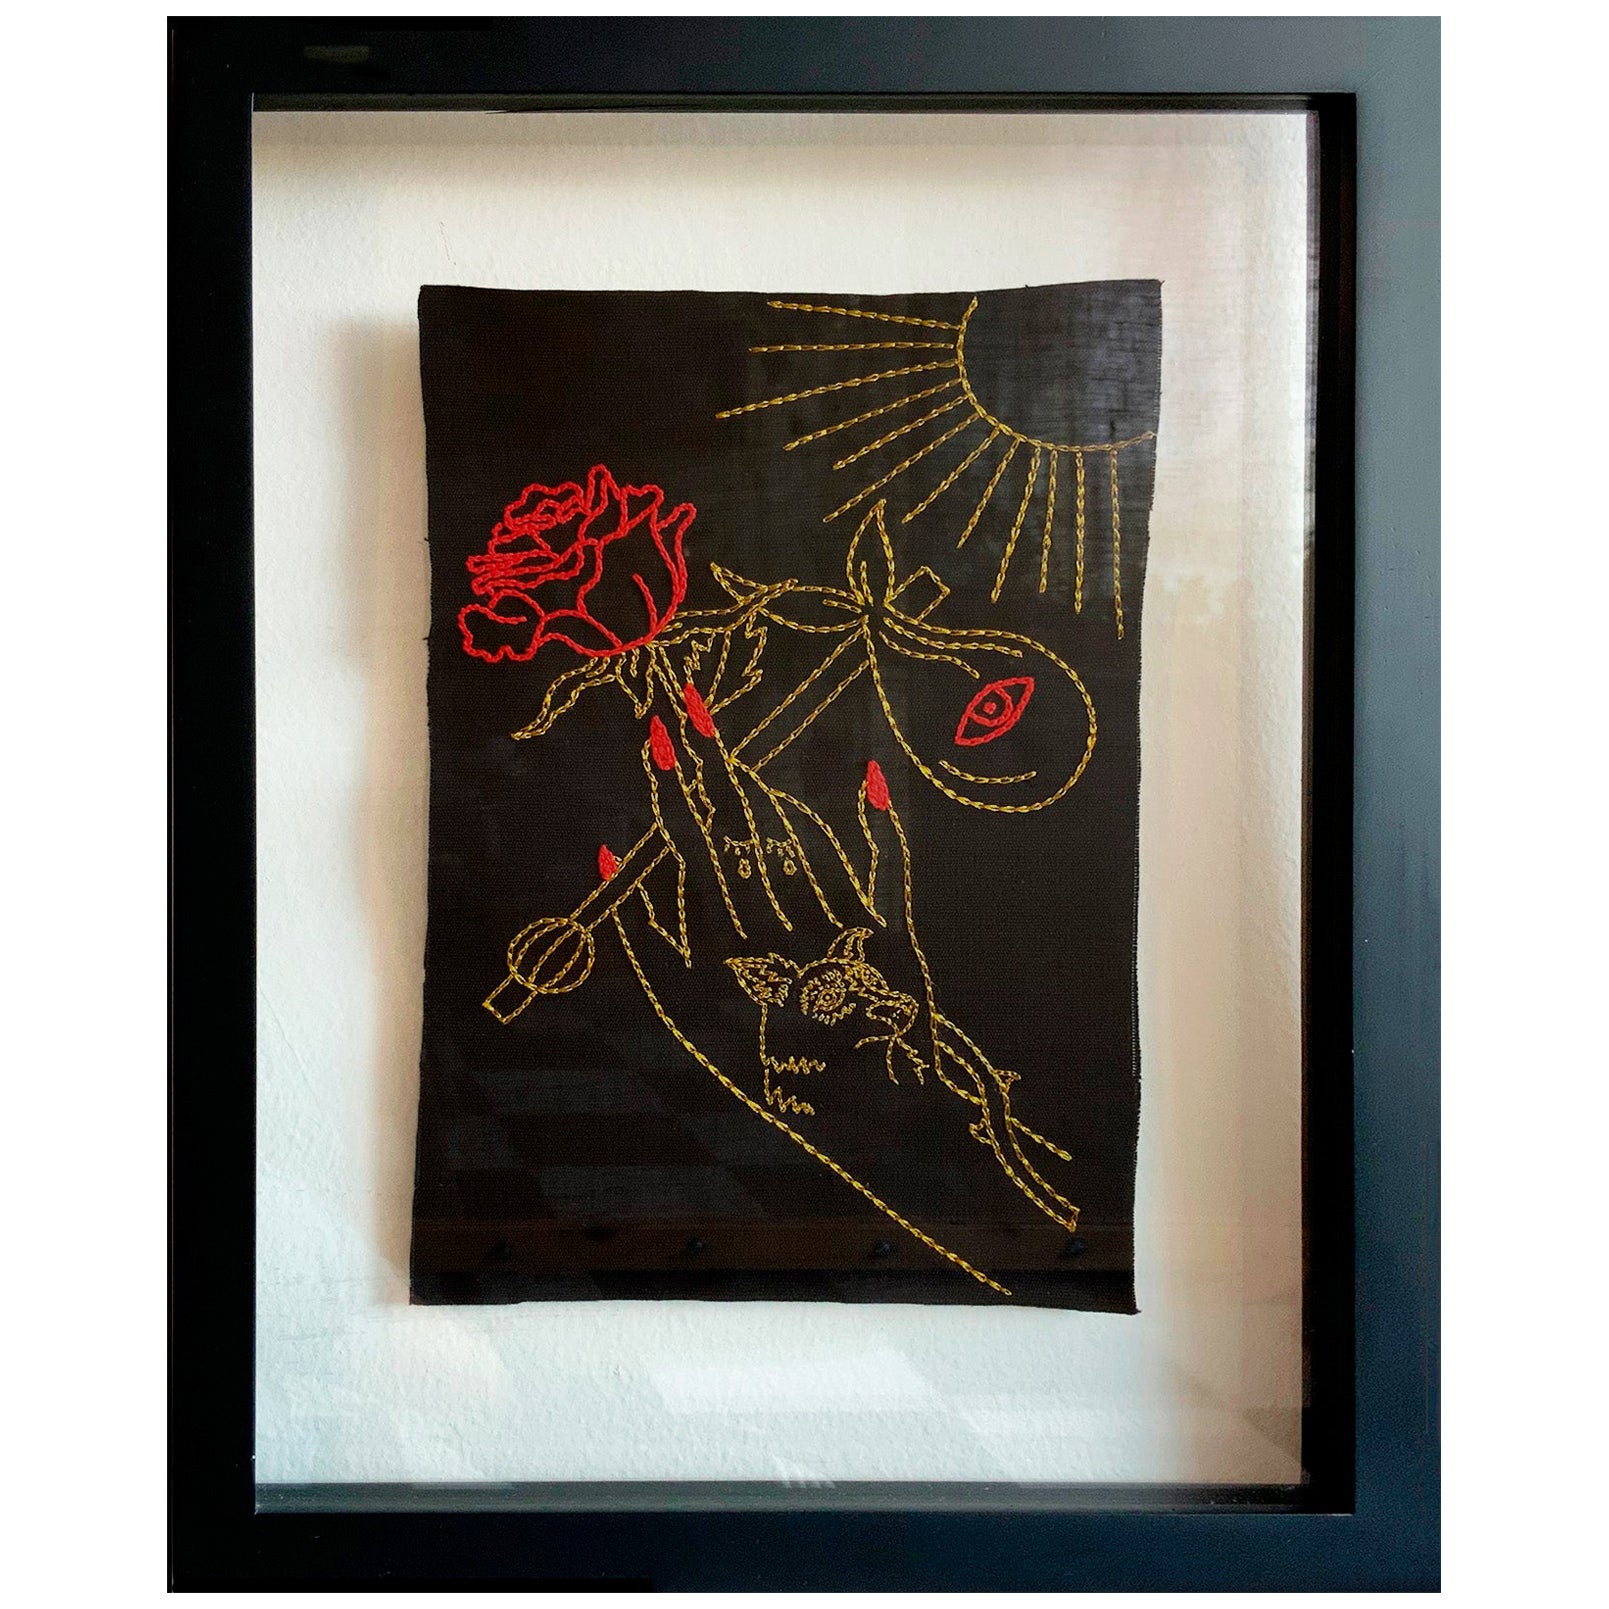 El Loco. From The Ventura Series. Embroidery thread on canvas. Framed